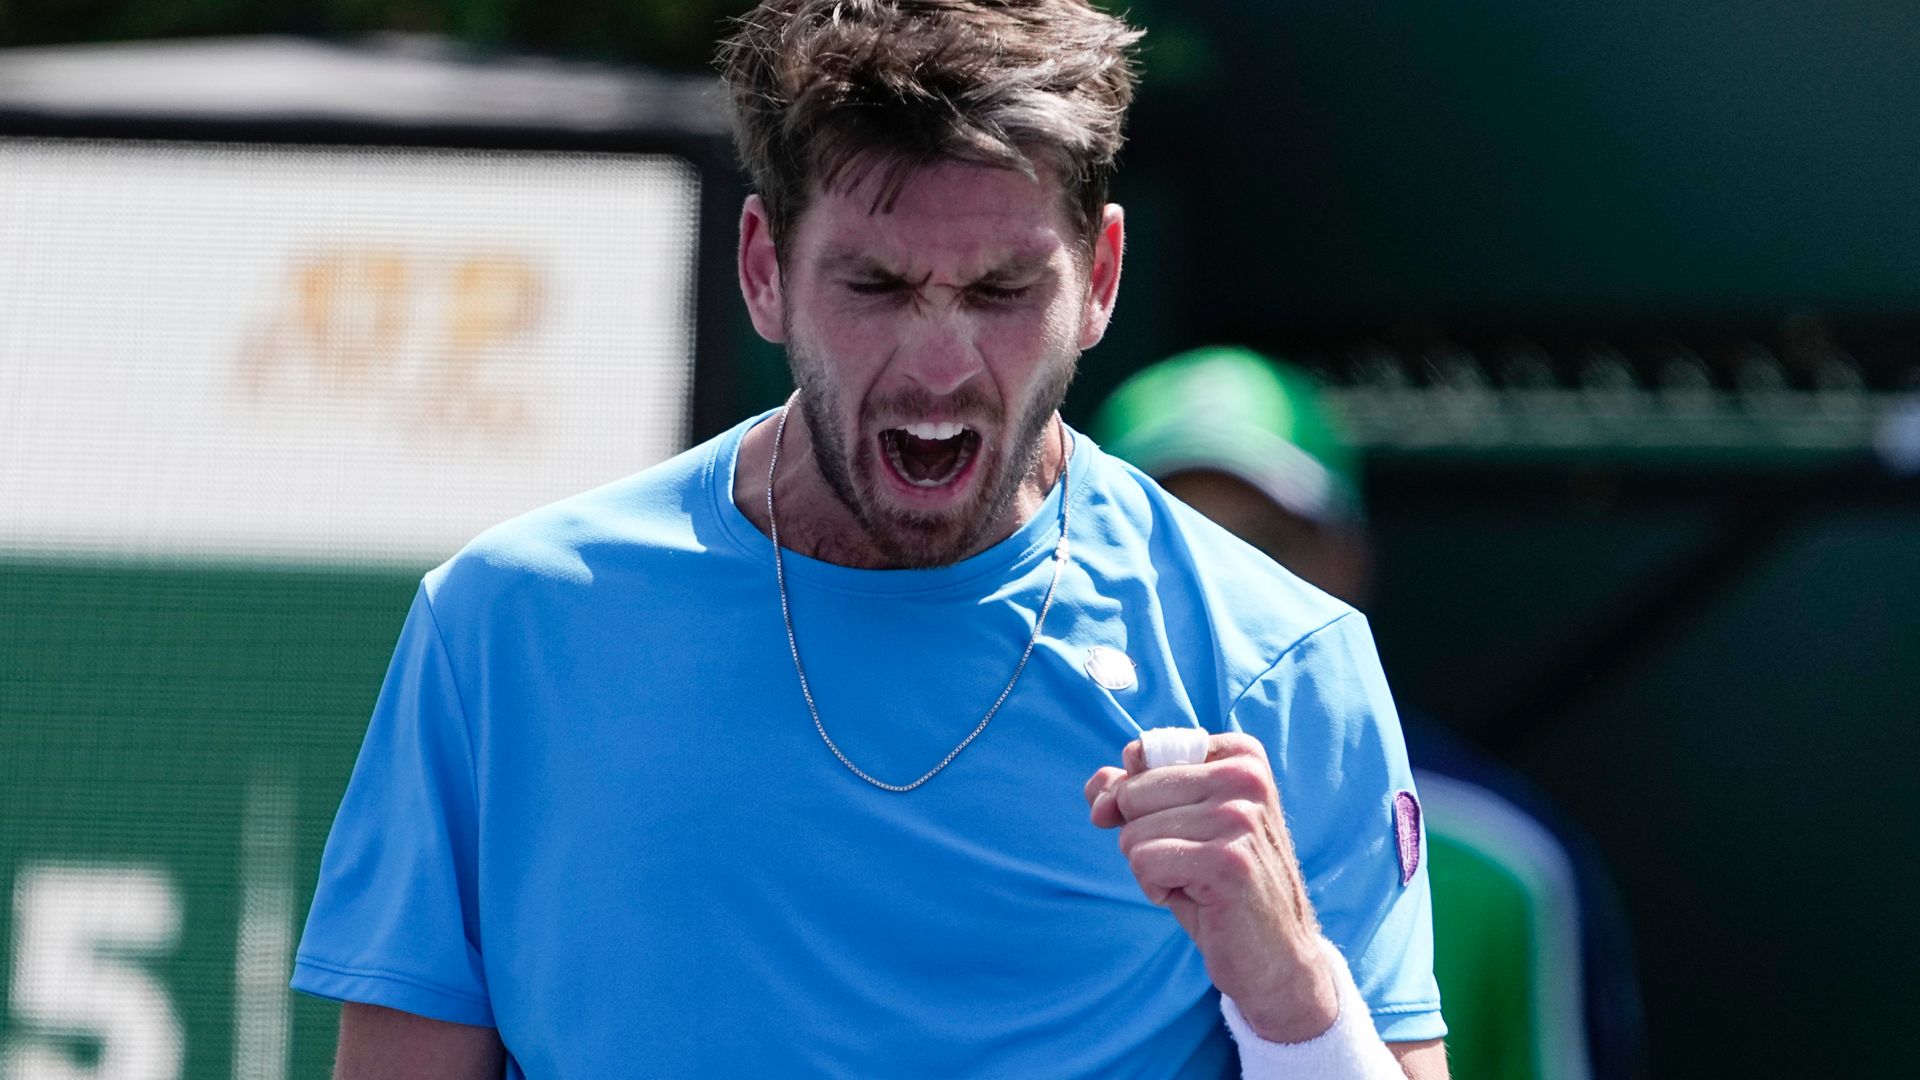 Norrie completes comeback to advance to Indian Wells fourth round